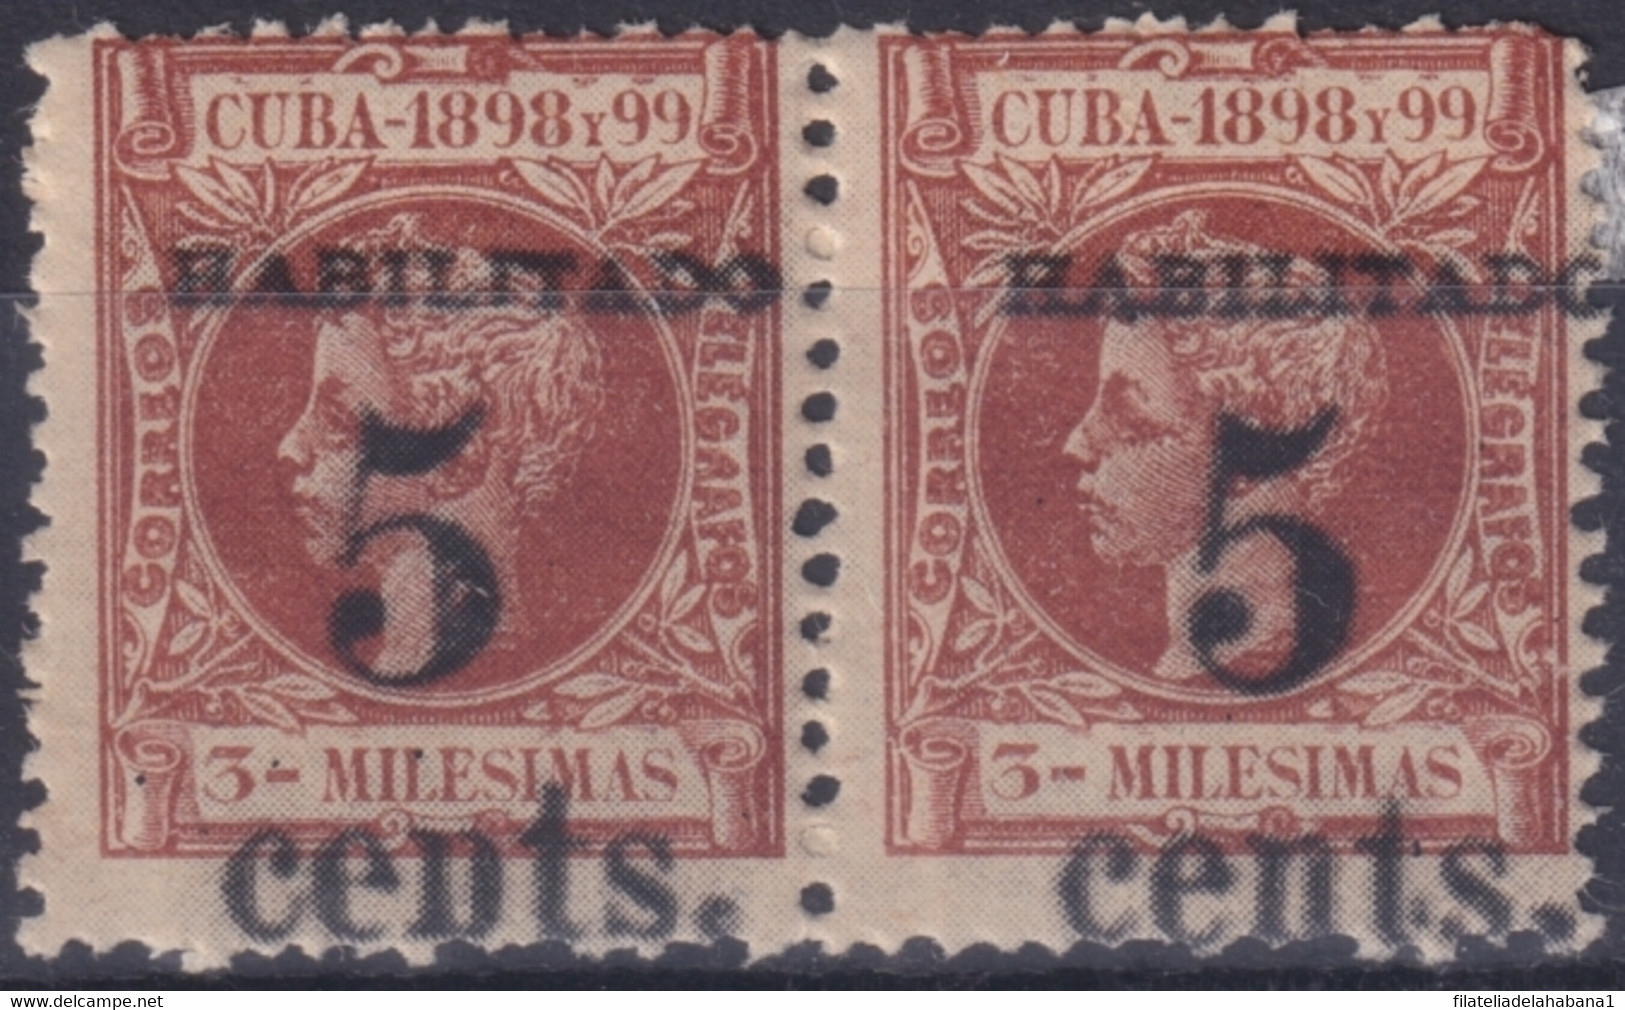 1899-481 CUBA 1899 5c S. 3c US OCCUPATION 2th ISSUE PAIR PHILATELIC FORGERY. - Unused Stamps